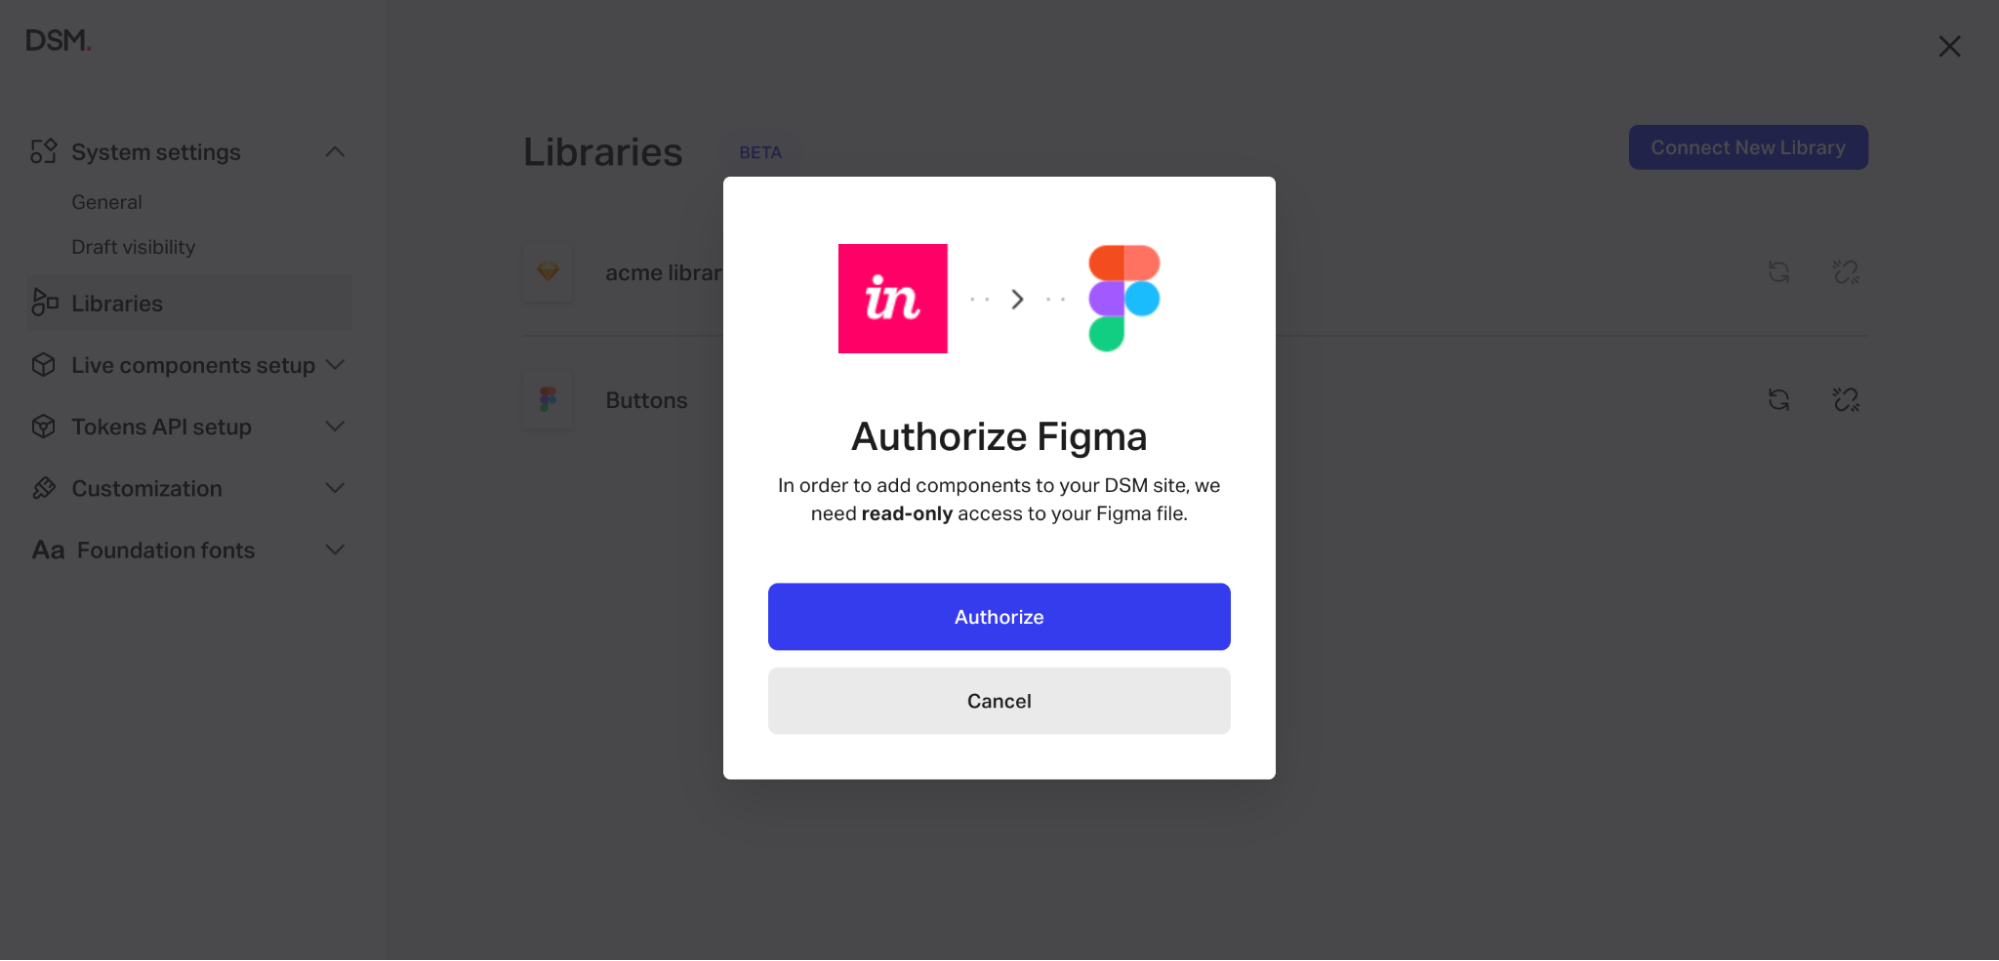 invision-dsm-authorize-figma-access.png